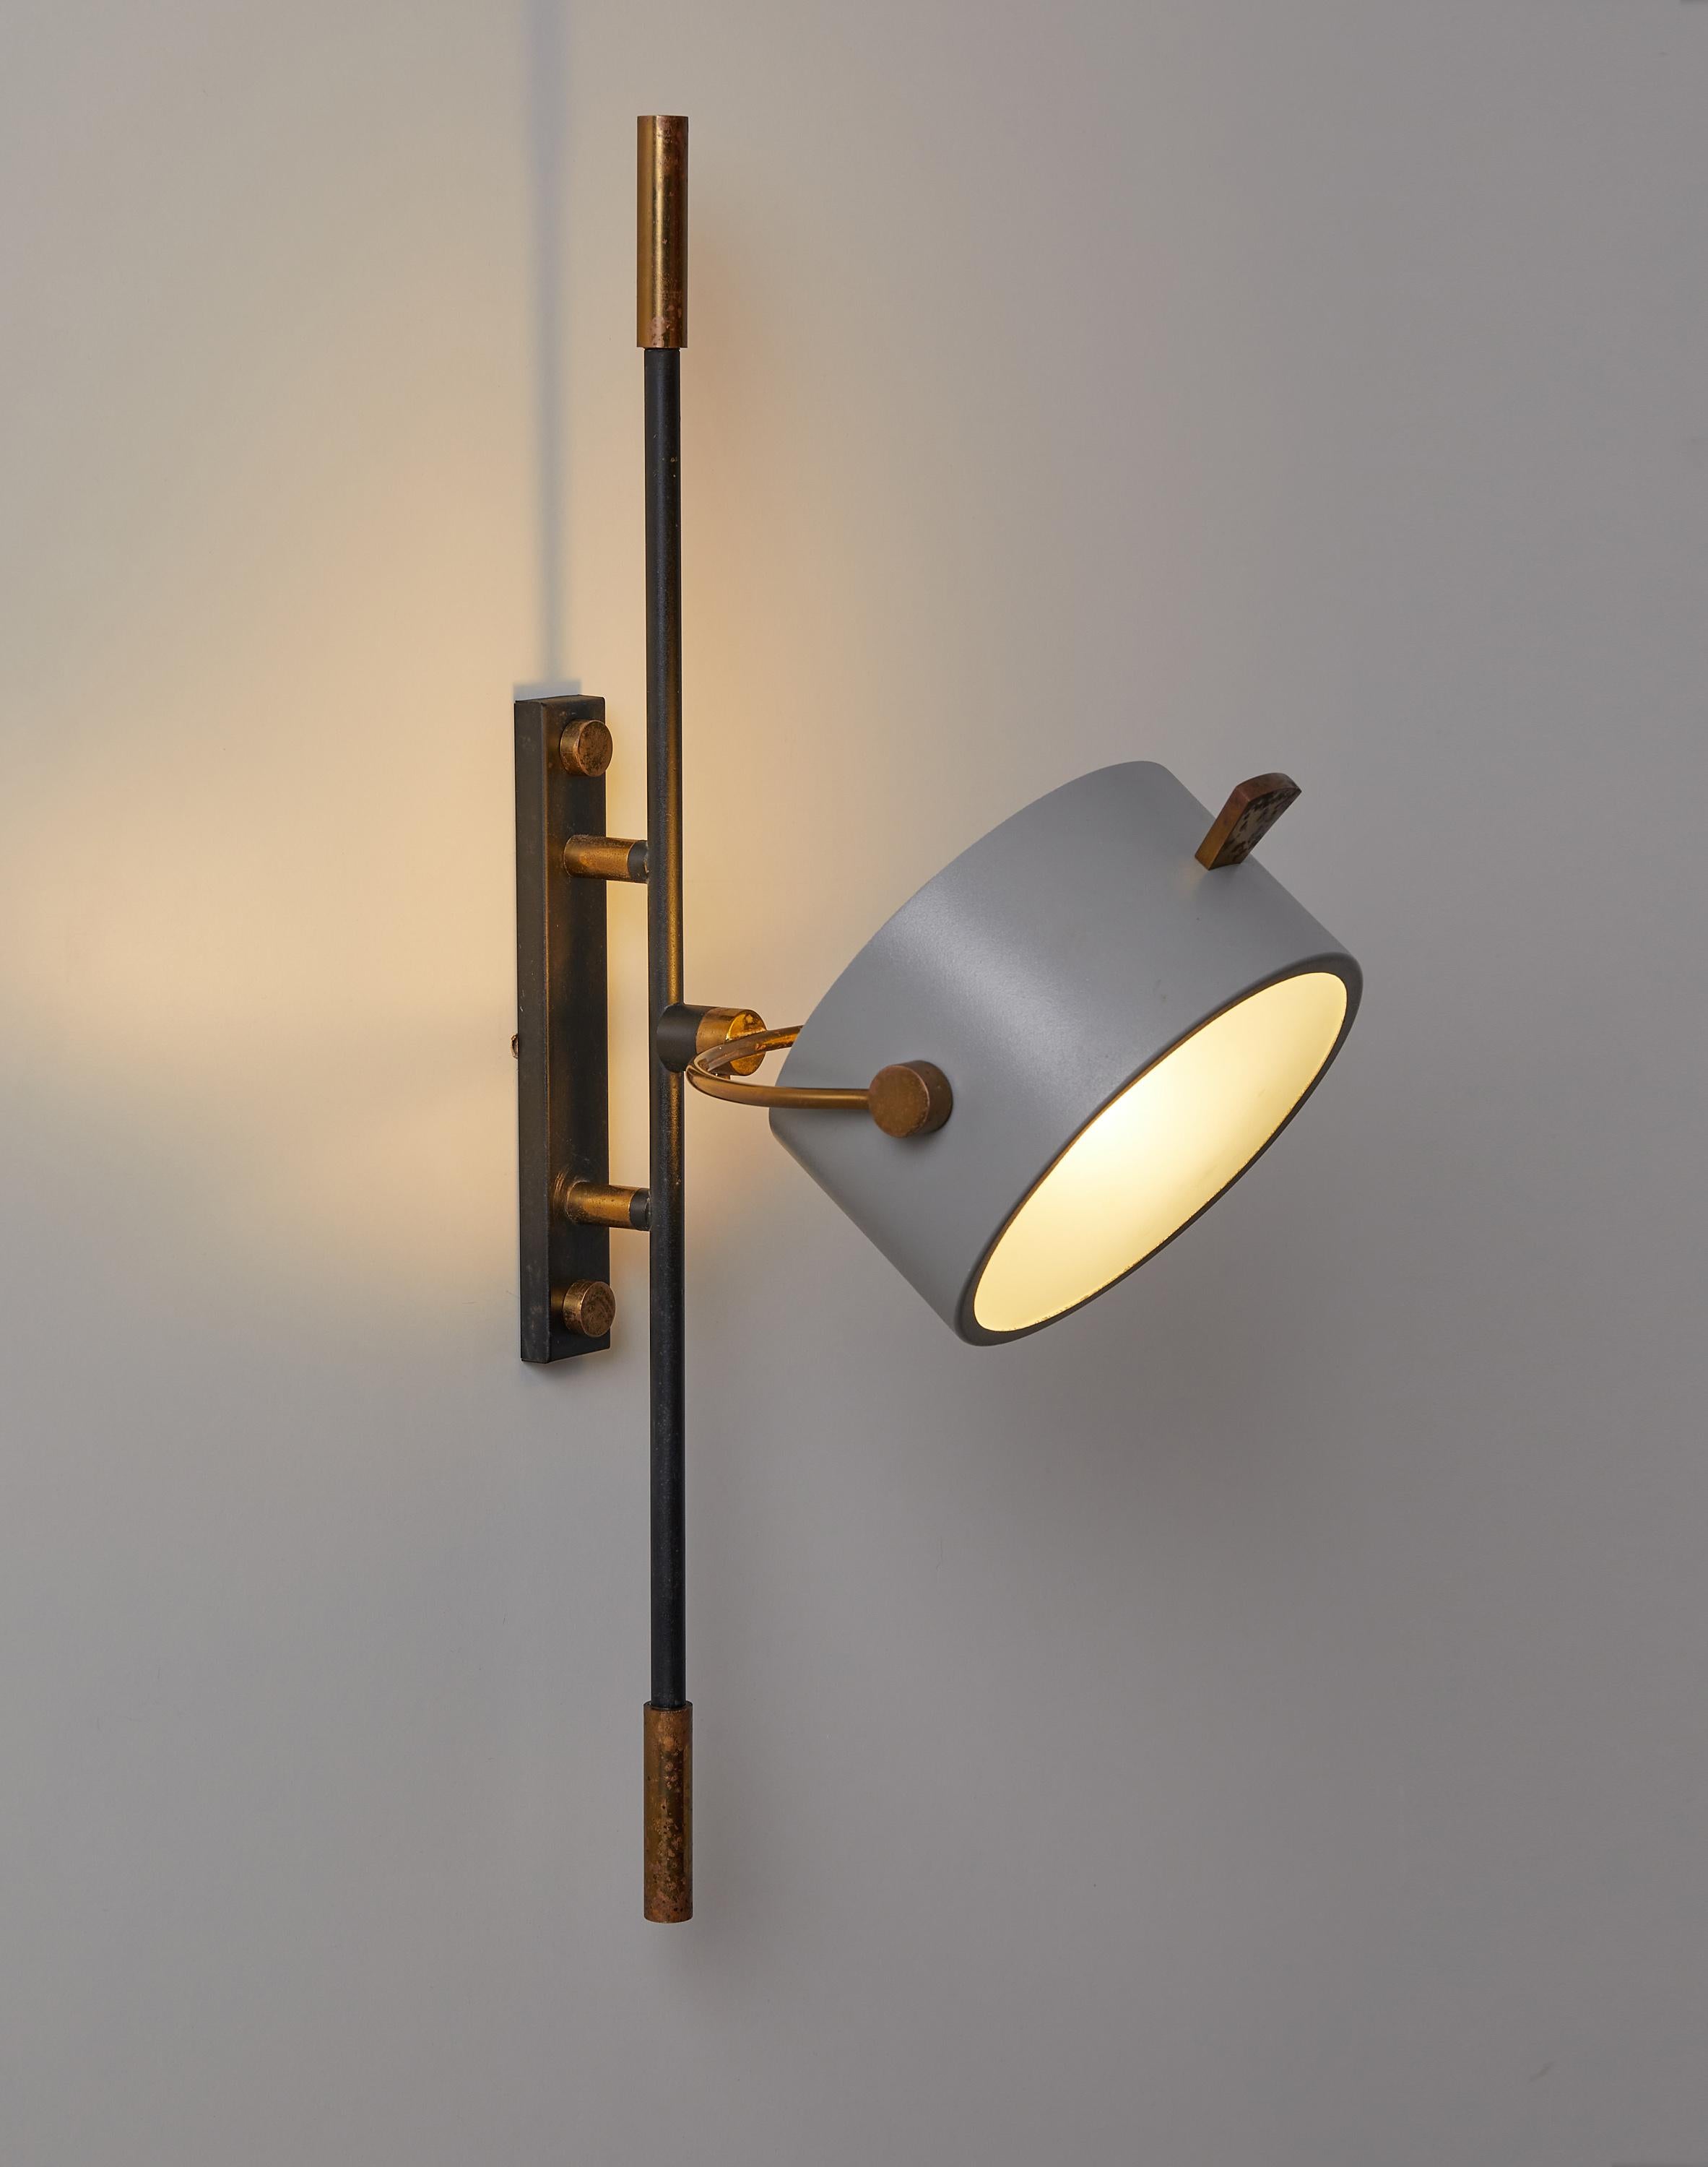 Wall sconce with lens shaped reflector by Maison Lunel, France, 1950

This elegant wall lamp is part of a rare series of wall lights having as a common element a circular reflector with curved sandblasted glass.

It is composed of a central rod